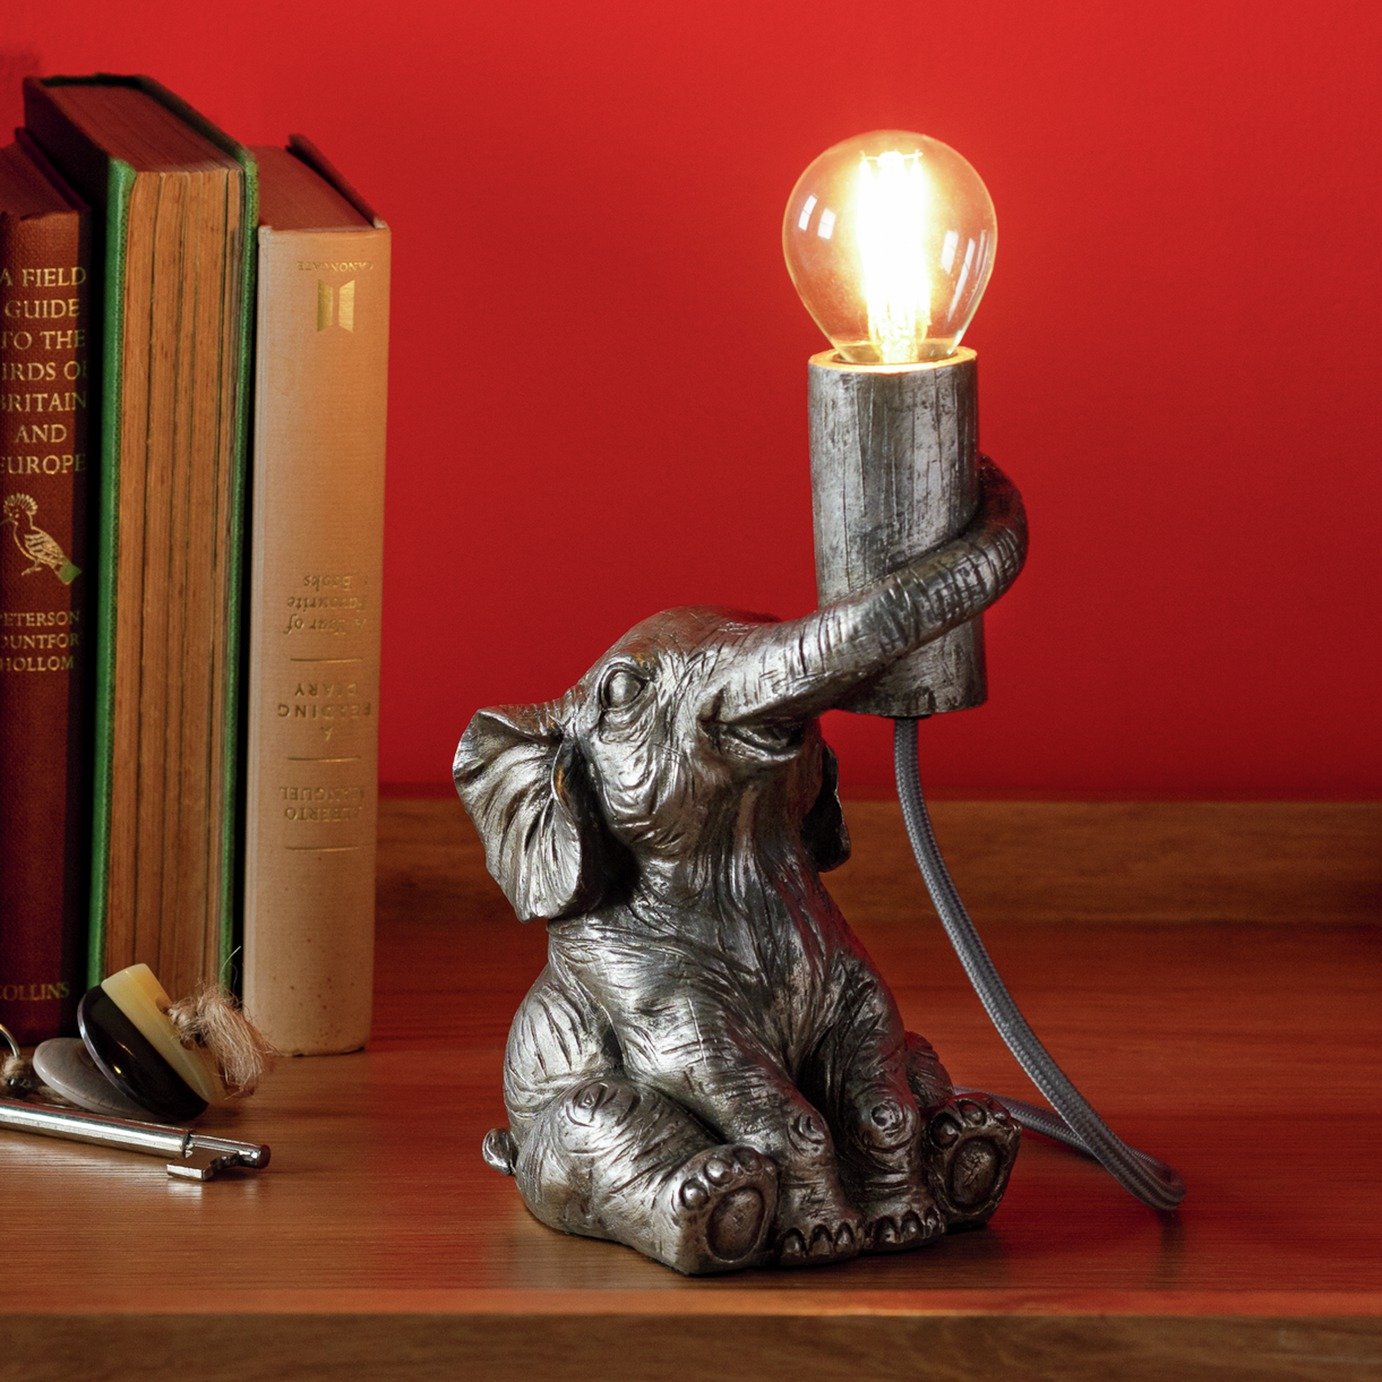 Argos Home Nelly the Elephant Table Lamp - Silver